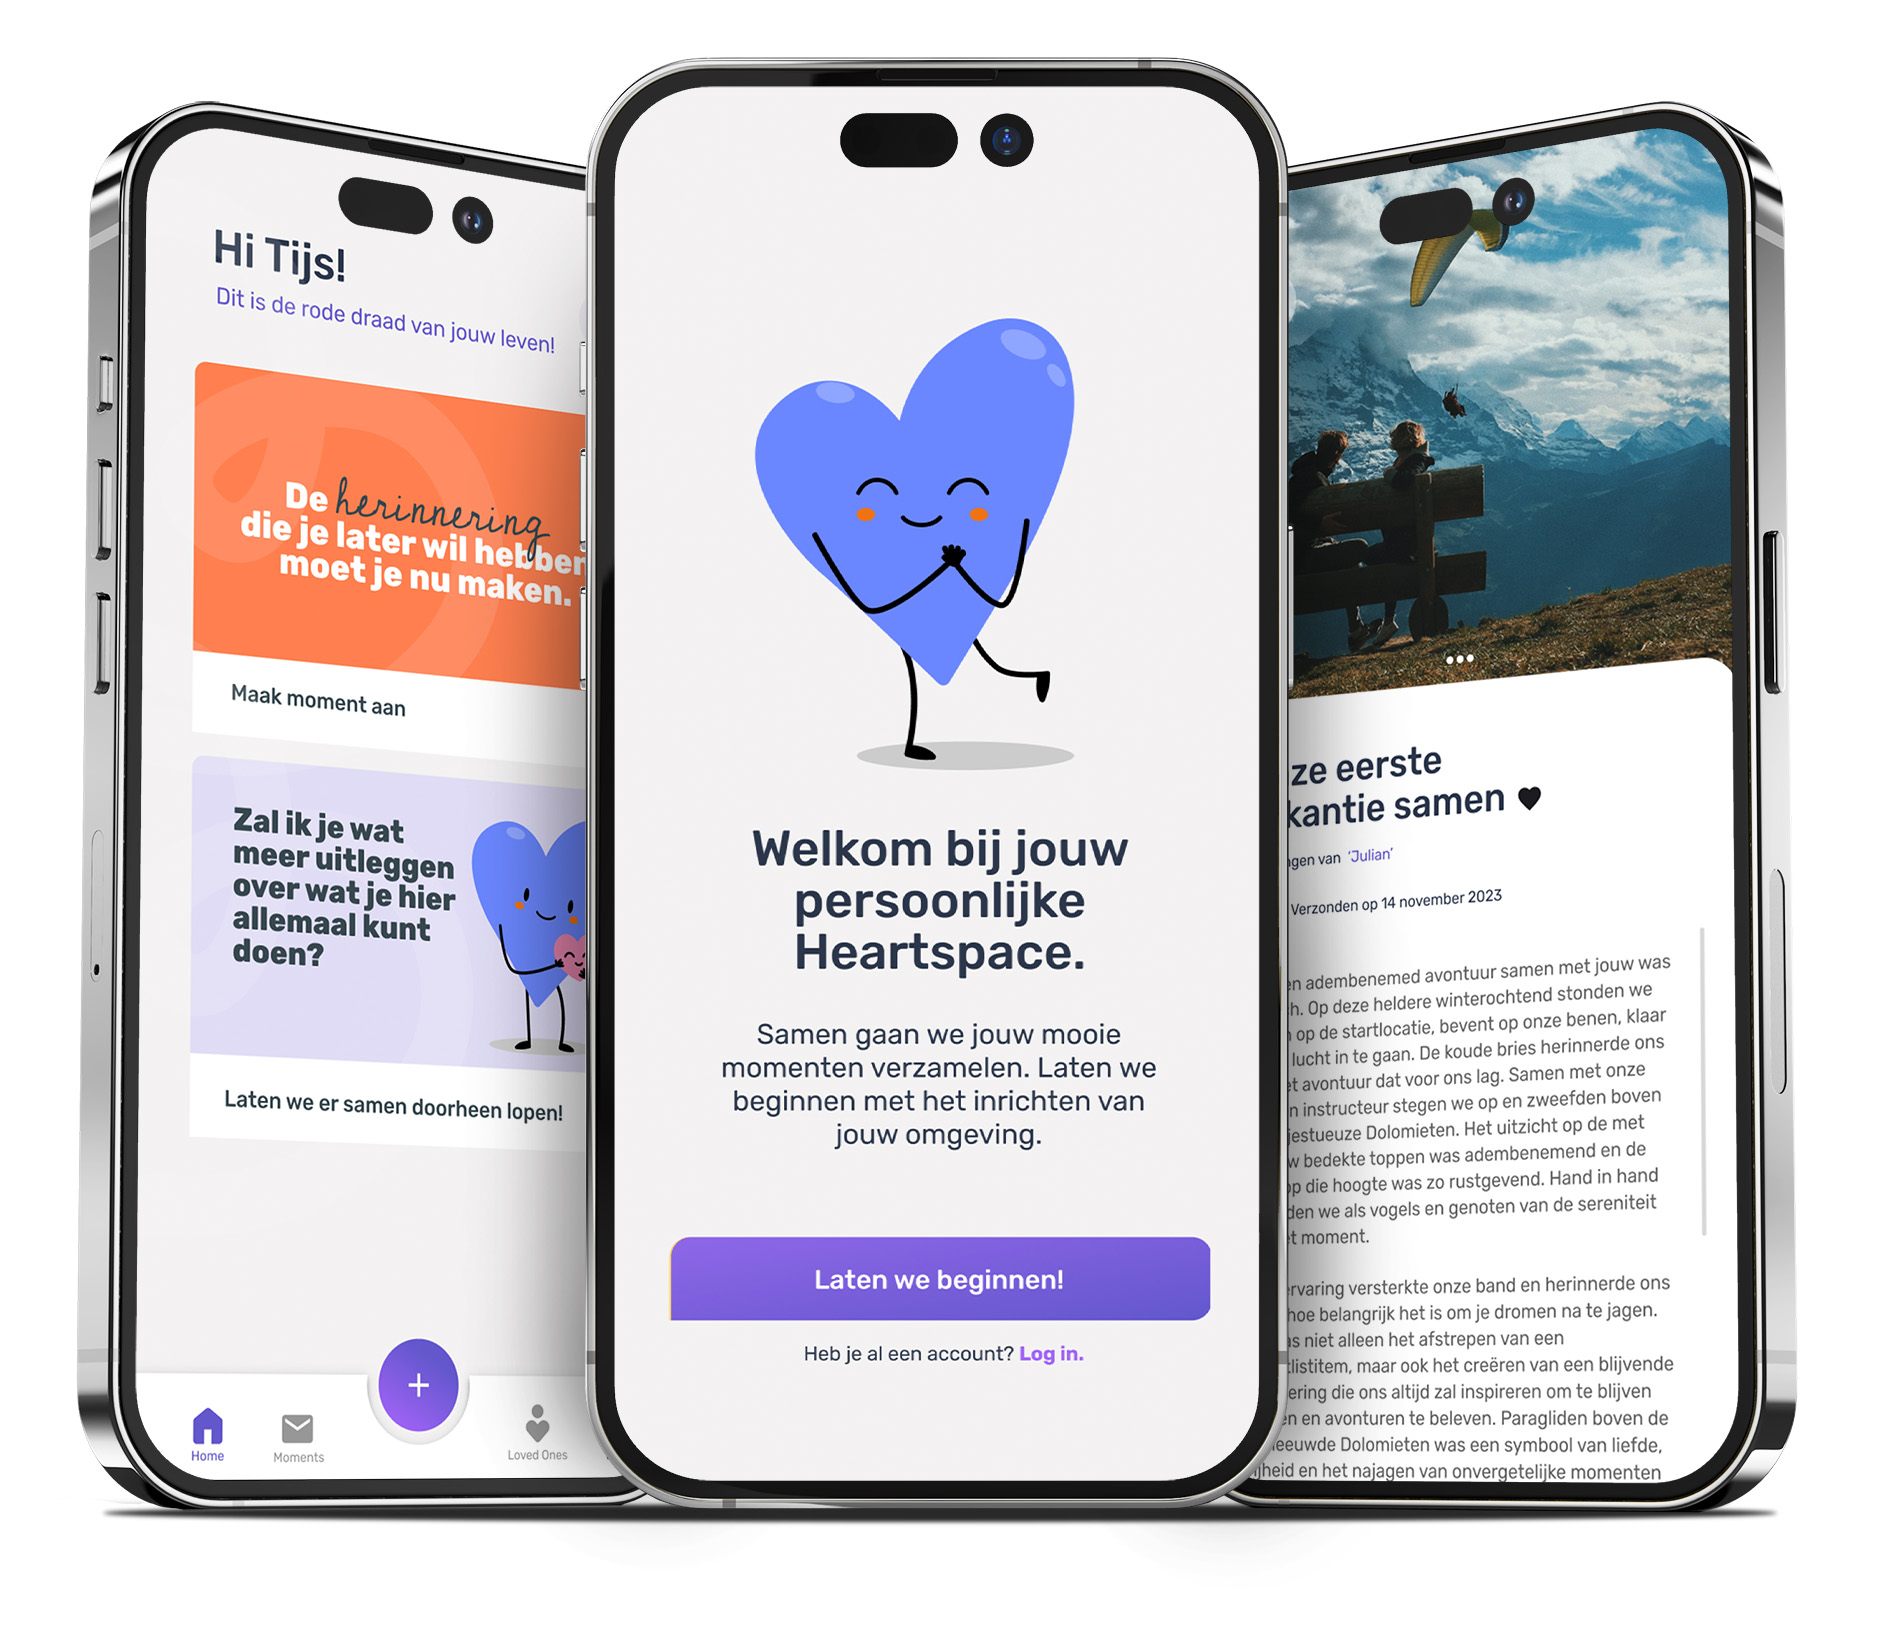 "Triptych screenshot of the My Heartspace app, showing three key screens. The first screen is the welcoming login page with mascot Huggy and an informative guide. The second screen highlights a poignant shared moment, set to be sent after the user's passing, with a personal message and photo. The third screen is the homepage, adorned with inspirational quotes to encourage moment creation, further guidance from Huggy, and featured blog posts, providing a comprehensive and engaging user experience.